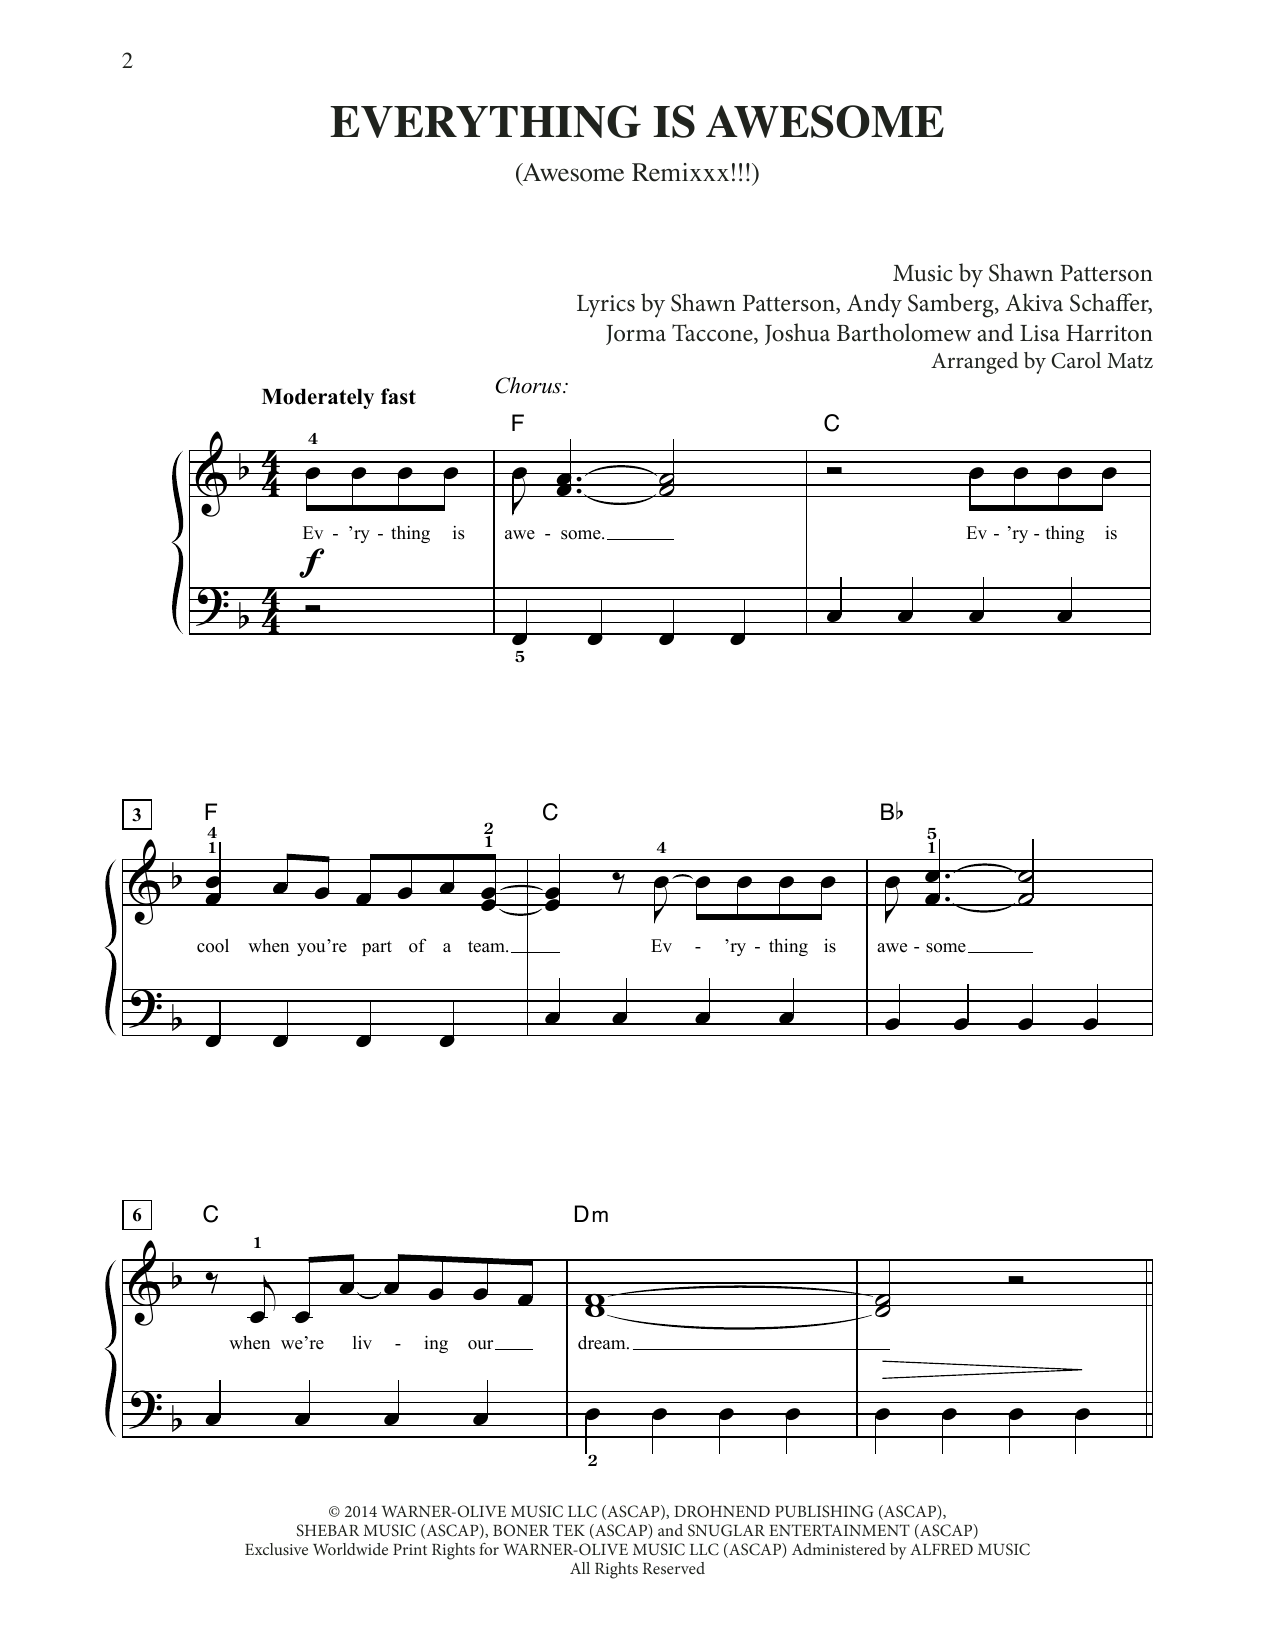 Download Tegan and Sara Everything Is Awesome (from The Lego Mo Sheet Music